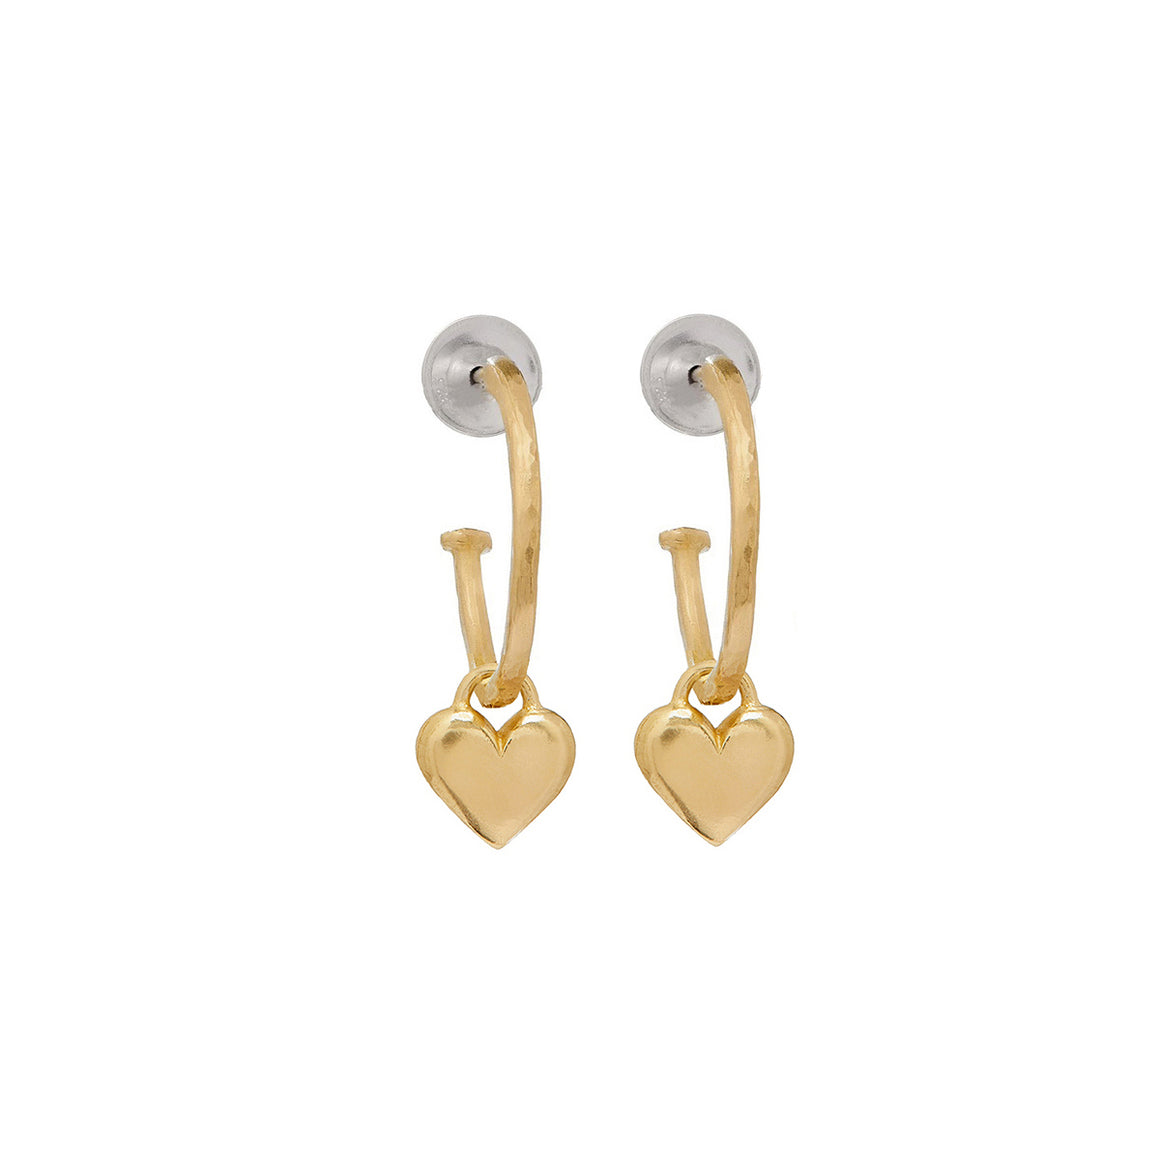 Small Gold Hoop Earrings With Gold Hearts